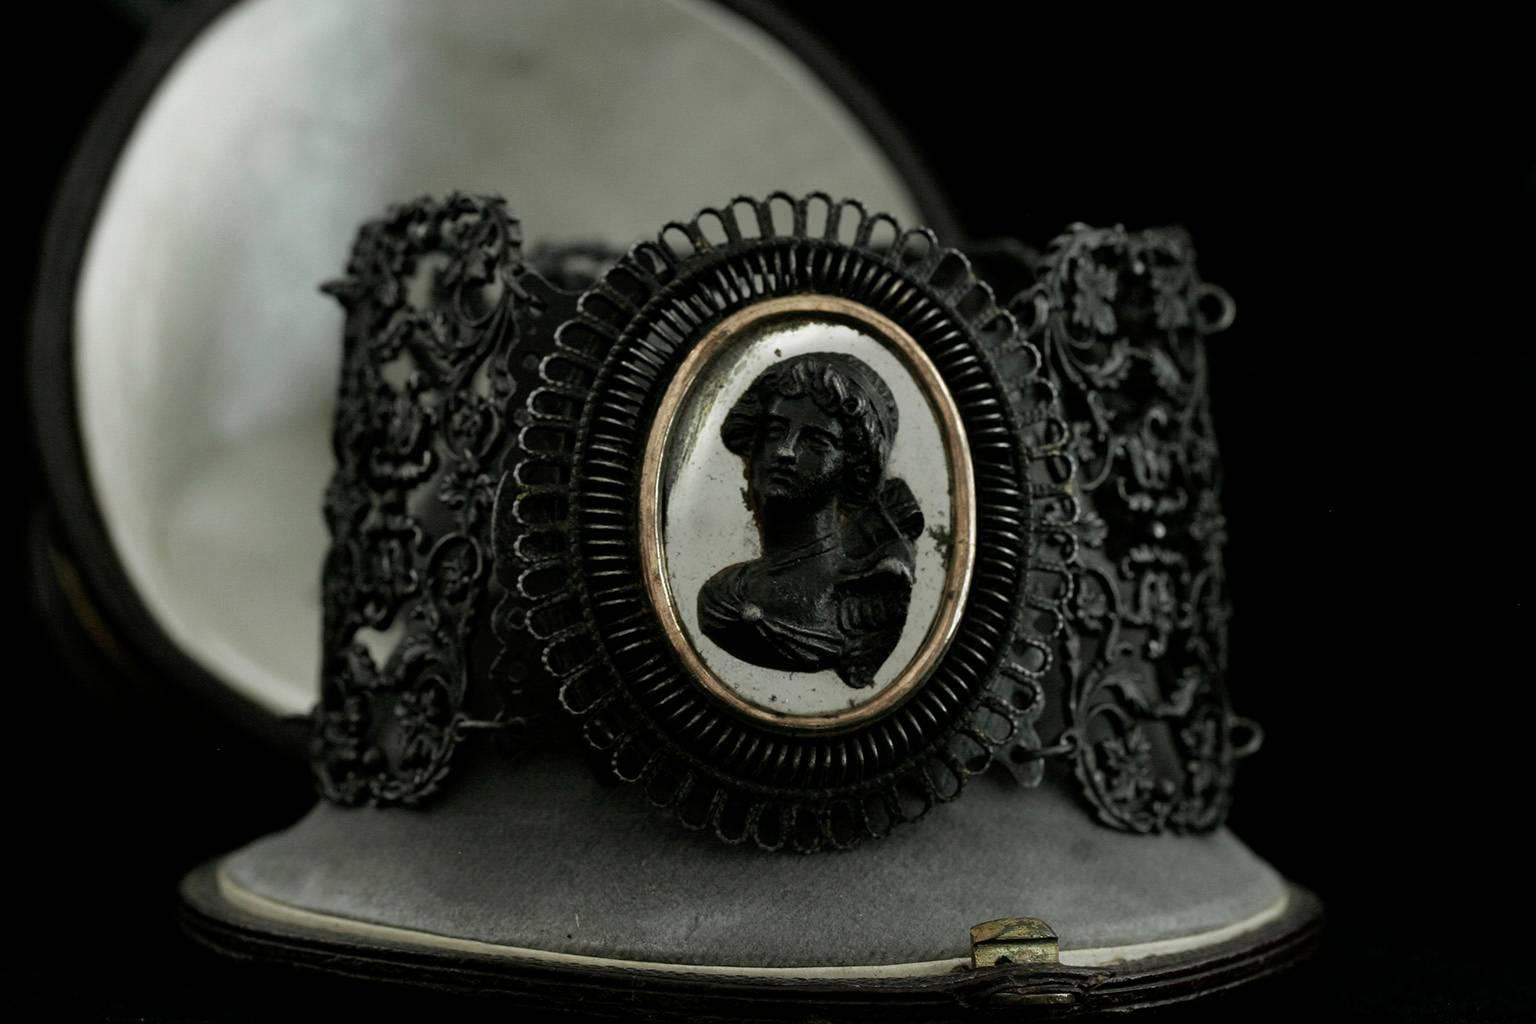 C.1820-1830. This wide Berlin iron bracelet consists of six individual rectangular cast iron plaques with a scrolled foliage motif. The central raised section of the beautiful female cameo /psyche on its golden-framed polished steel oval is attached